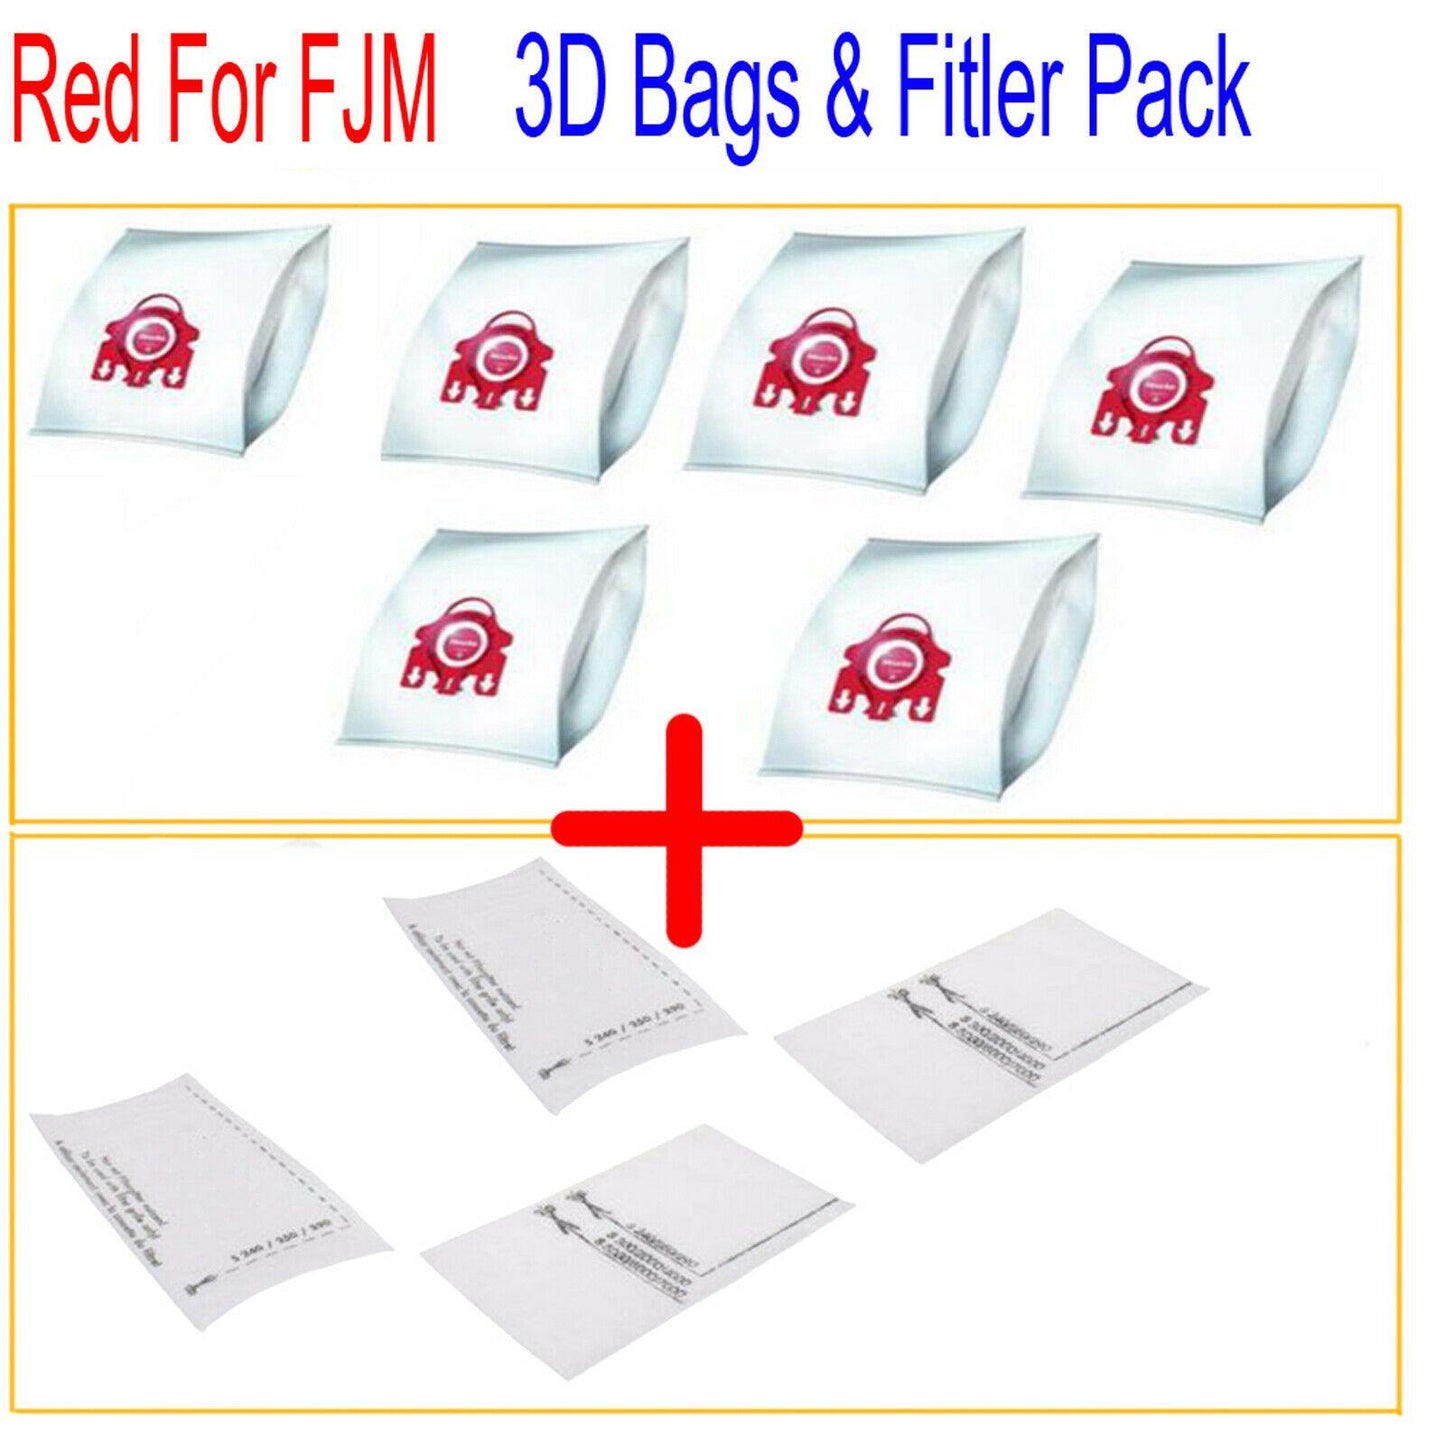 6 x Synthetic Dust Bags + 4 Filters For Miele S4210 Carina S4210 Capella S4211 Sparesbarn